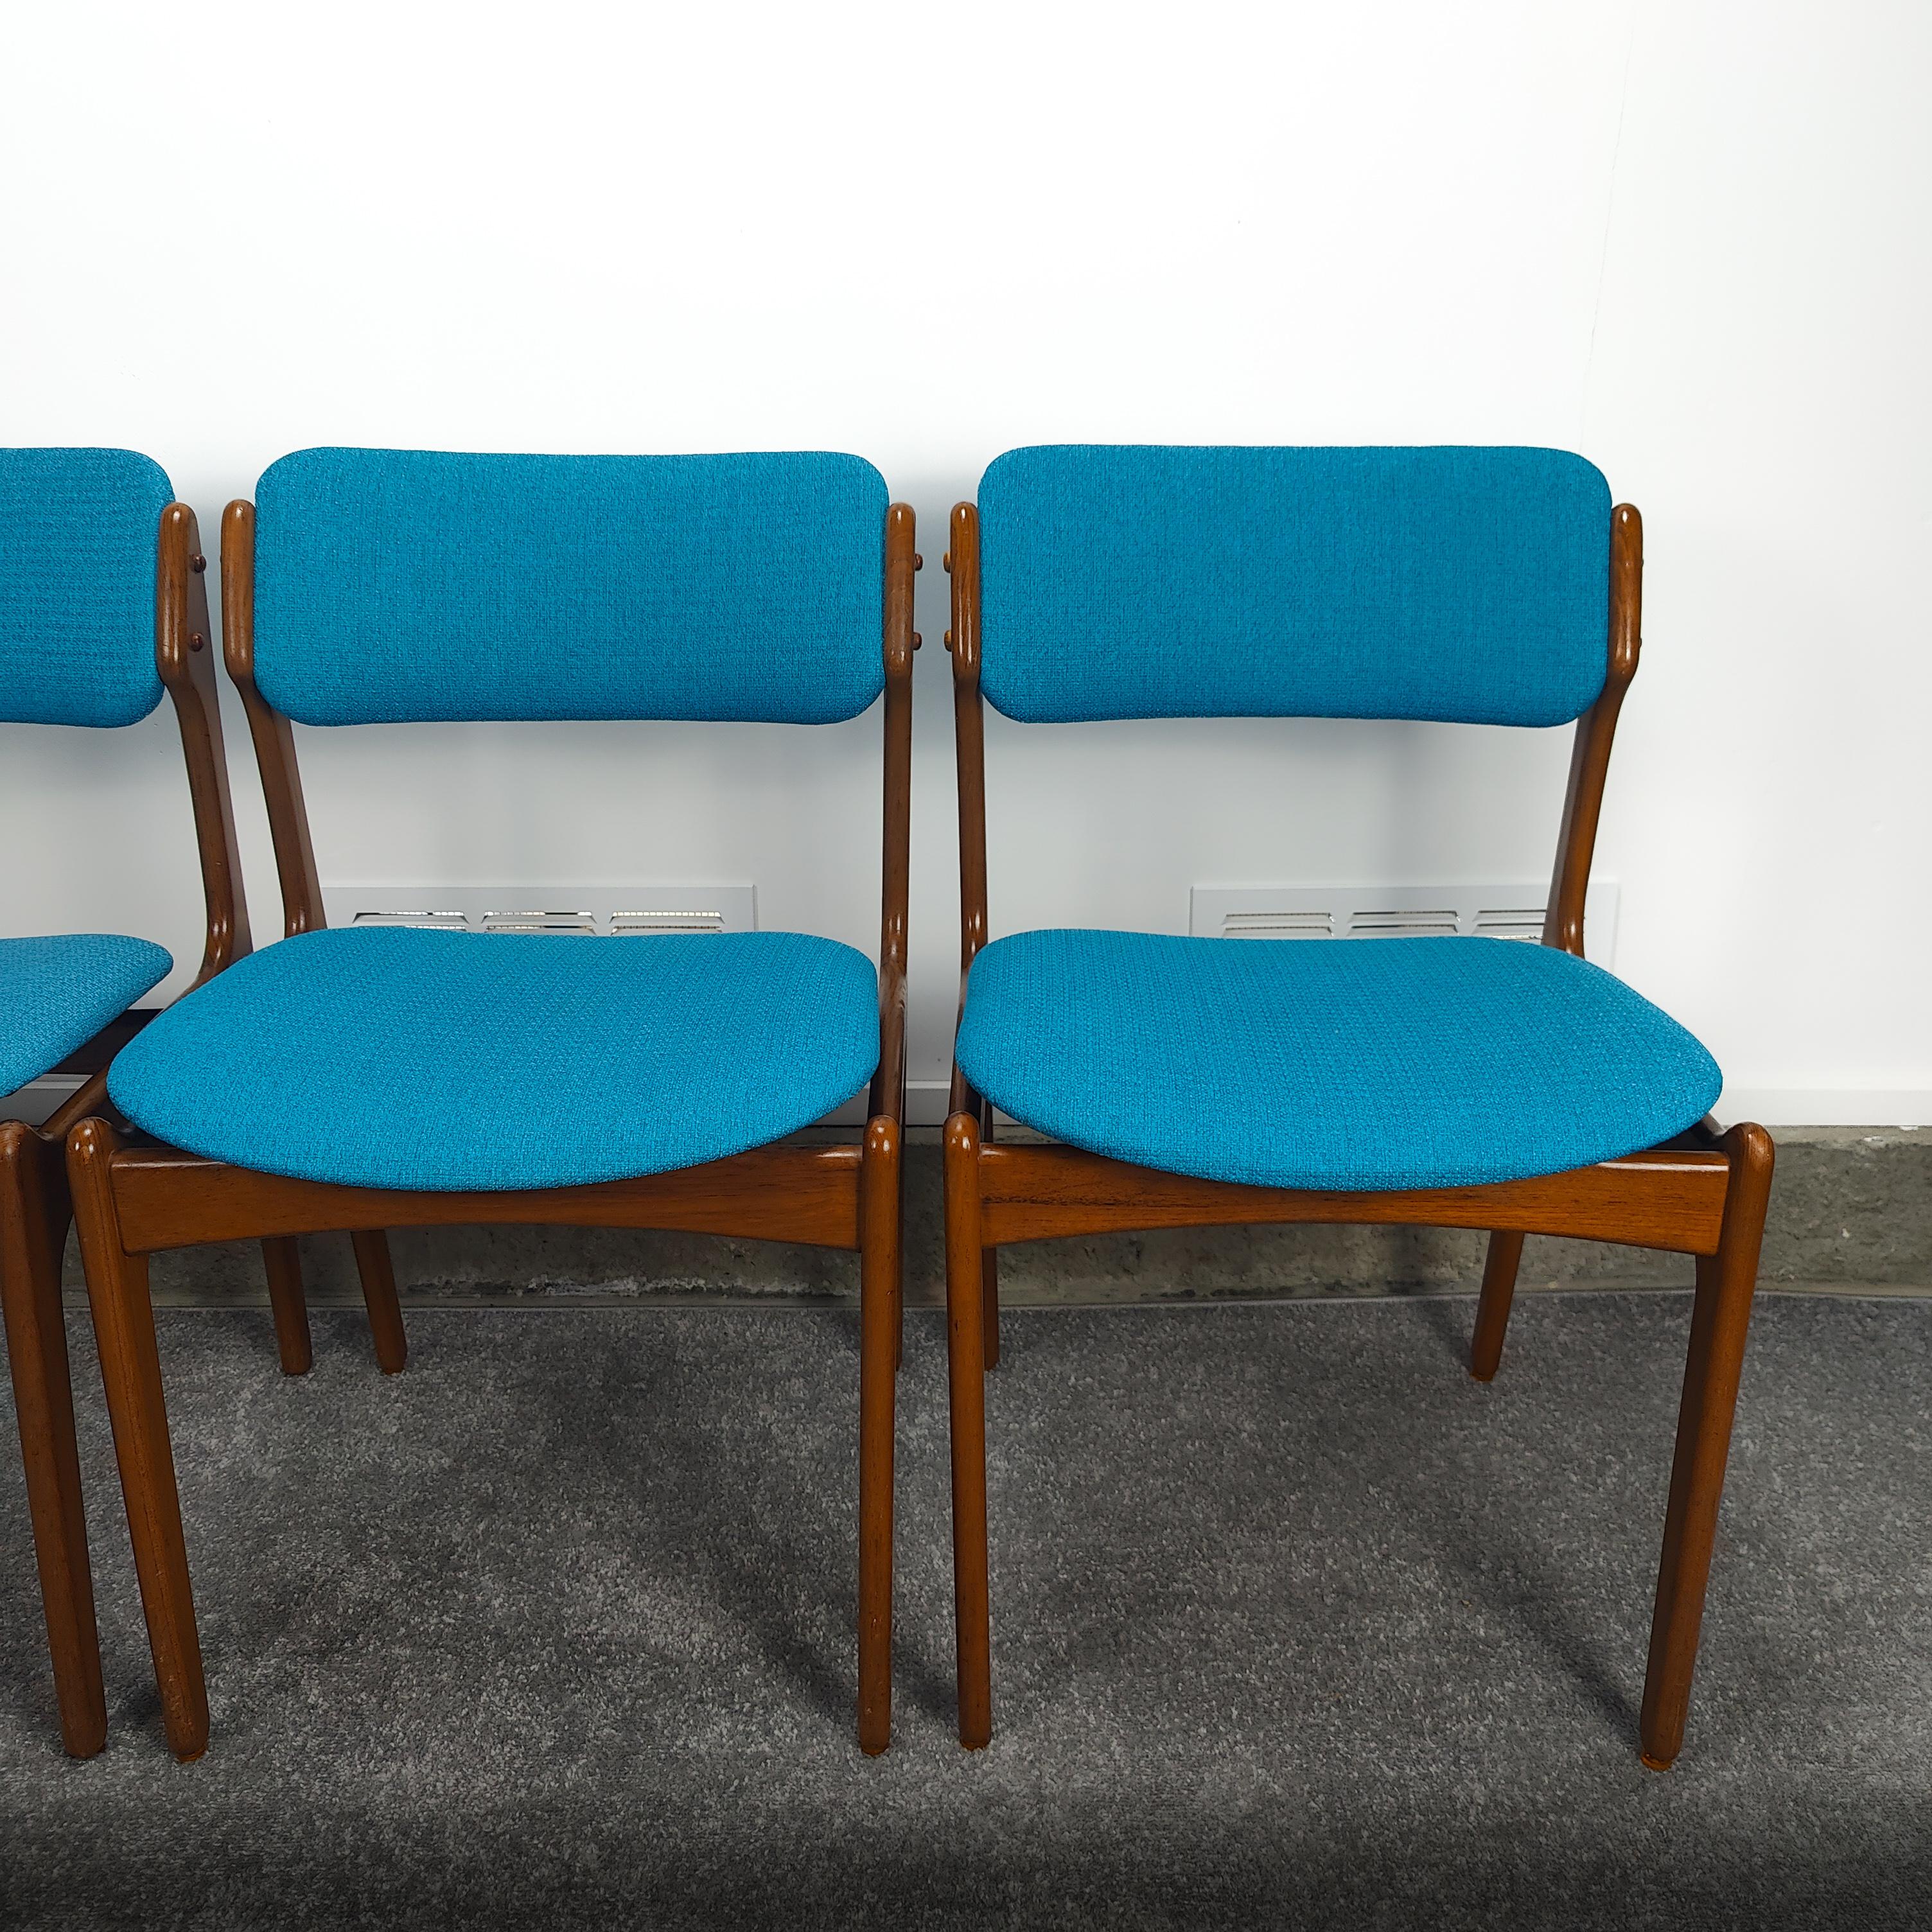 Danish Vintage Mid-Century Modern Teak Dining Chairs by Erik Buch for O.D. Mobler